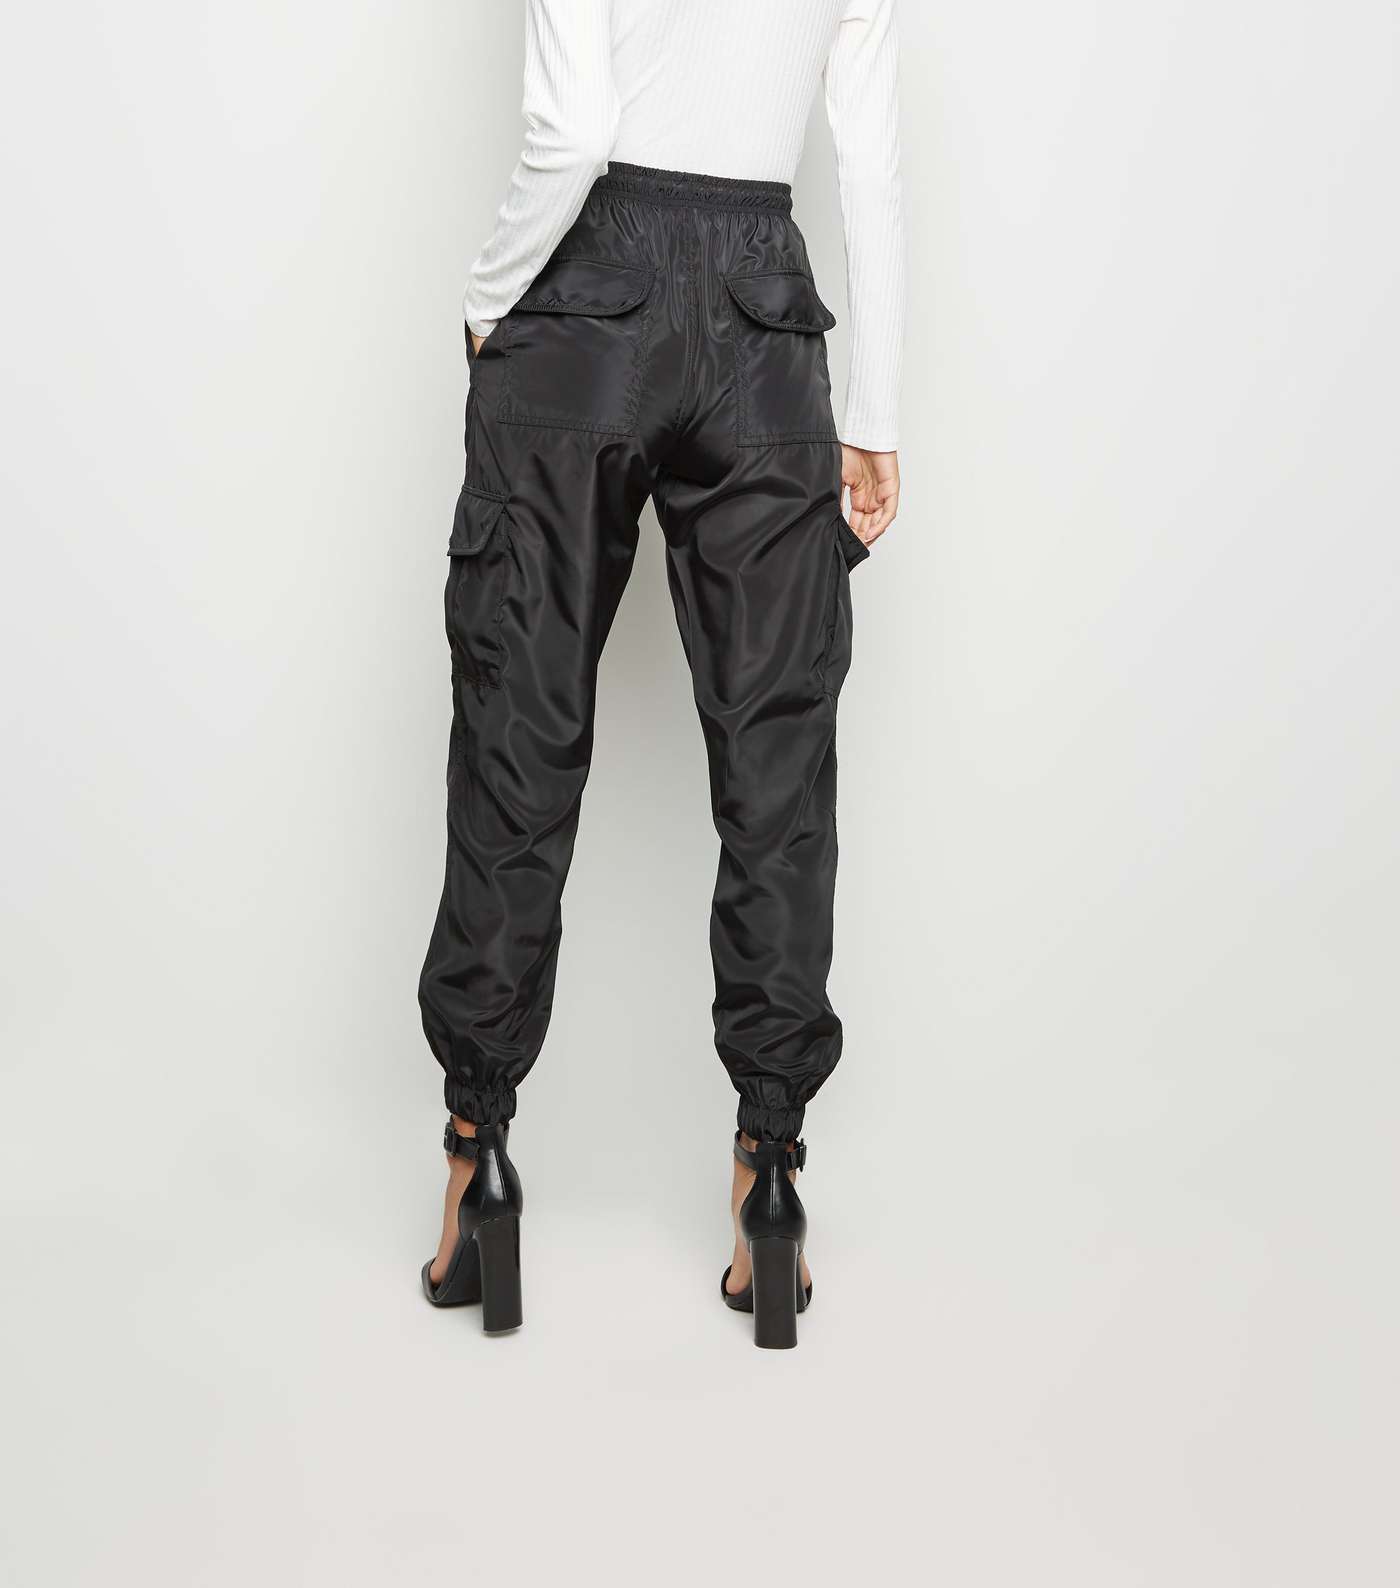 Cameo Rose Black Cuffed Utility Trousers Image 3